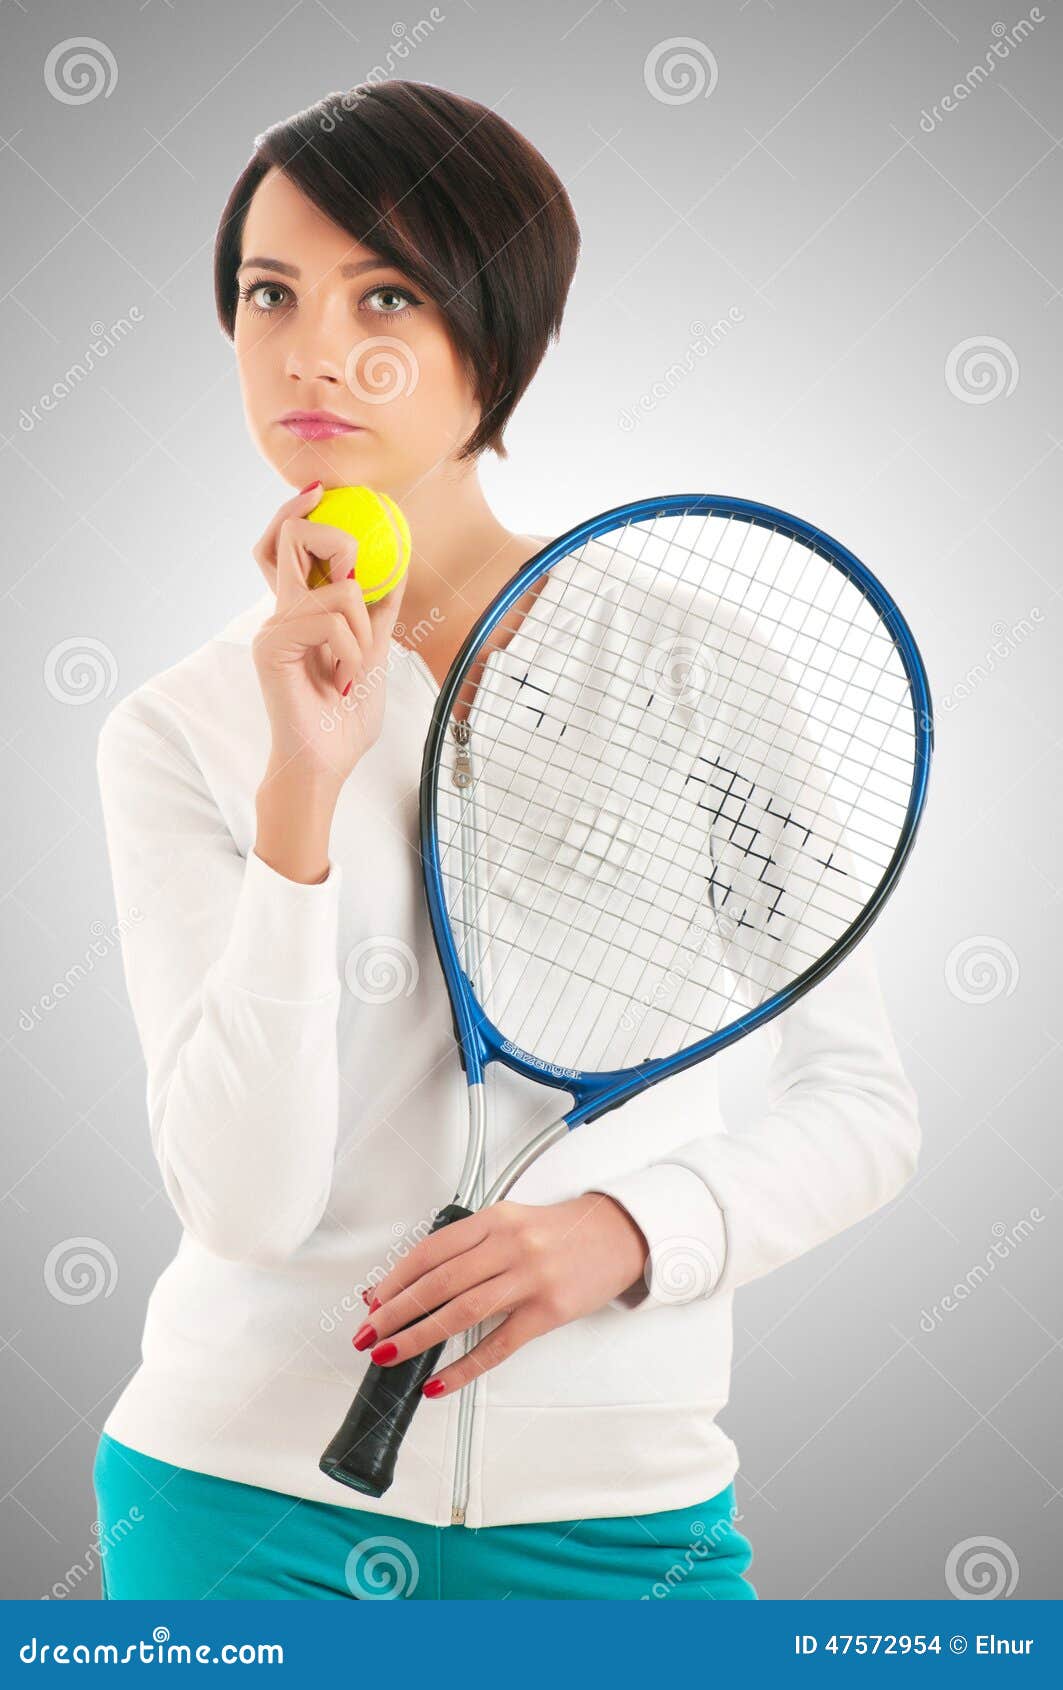 Young girl with tennis racket and bal on white